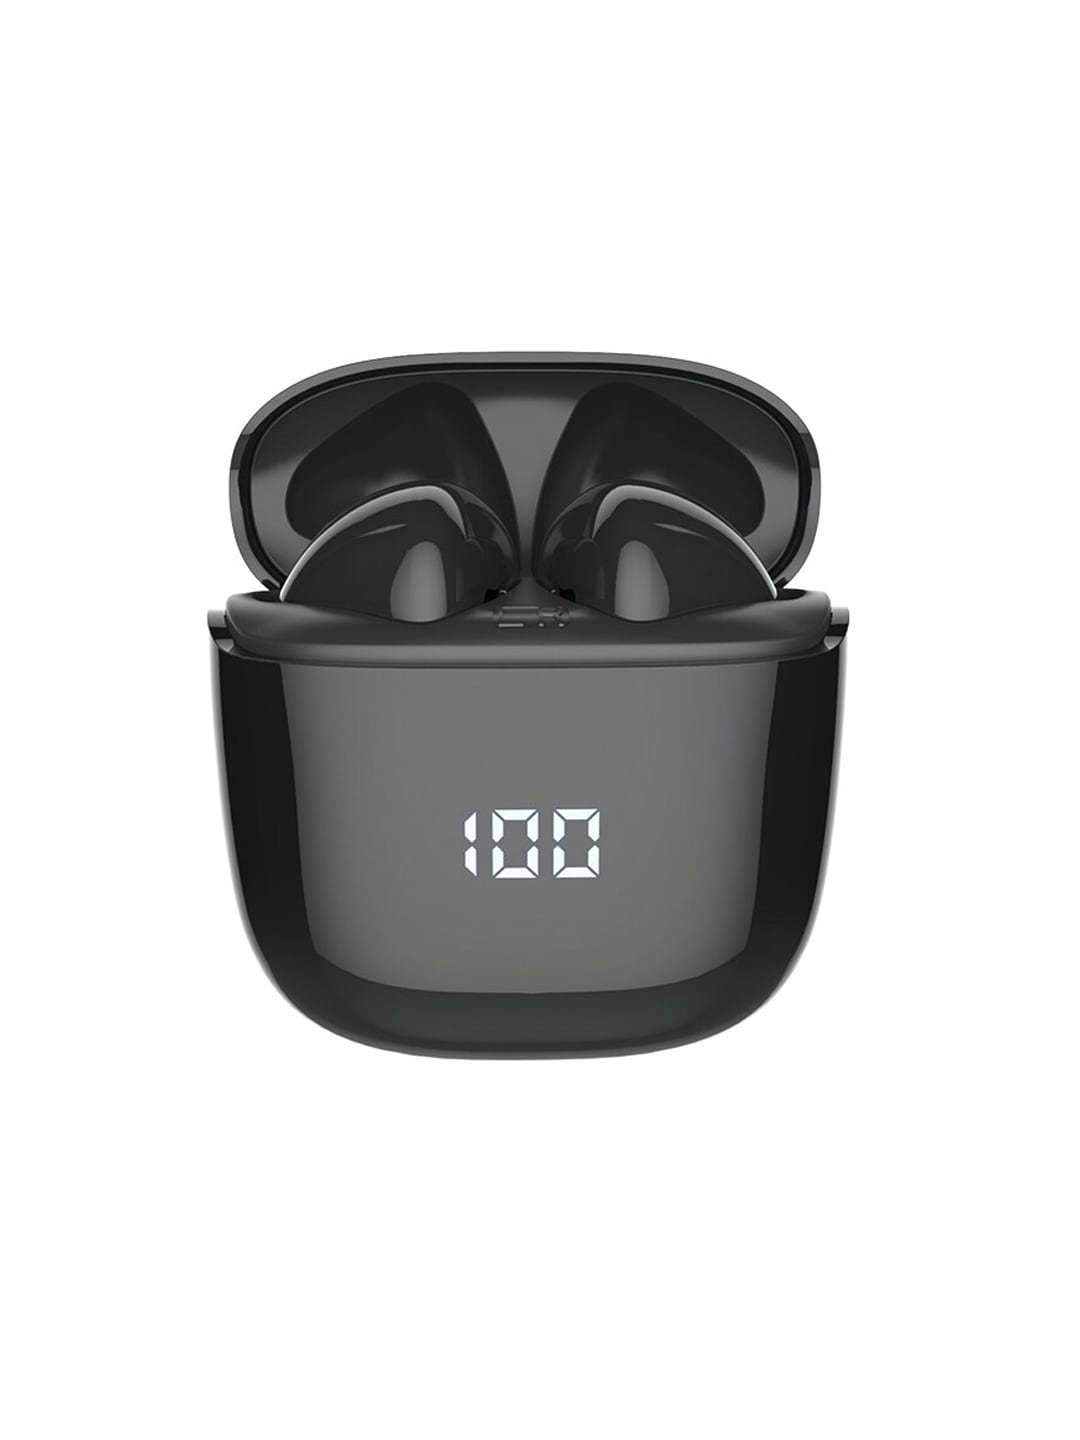 JUST CORSECA Black Spacer Truly Wireless Earphones With Stereo Output Price in India